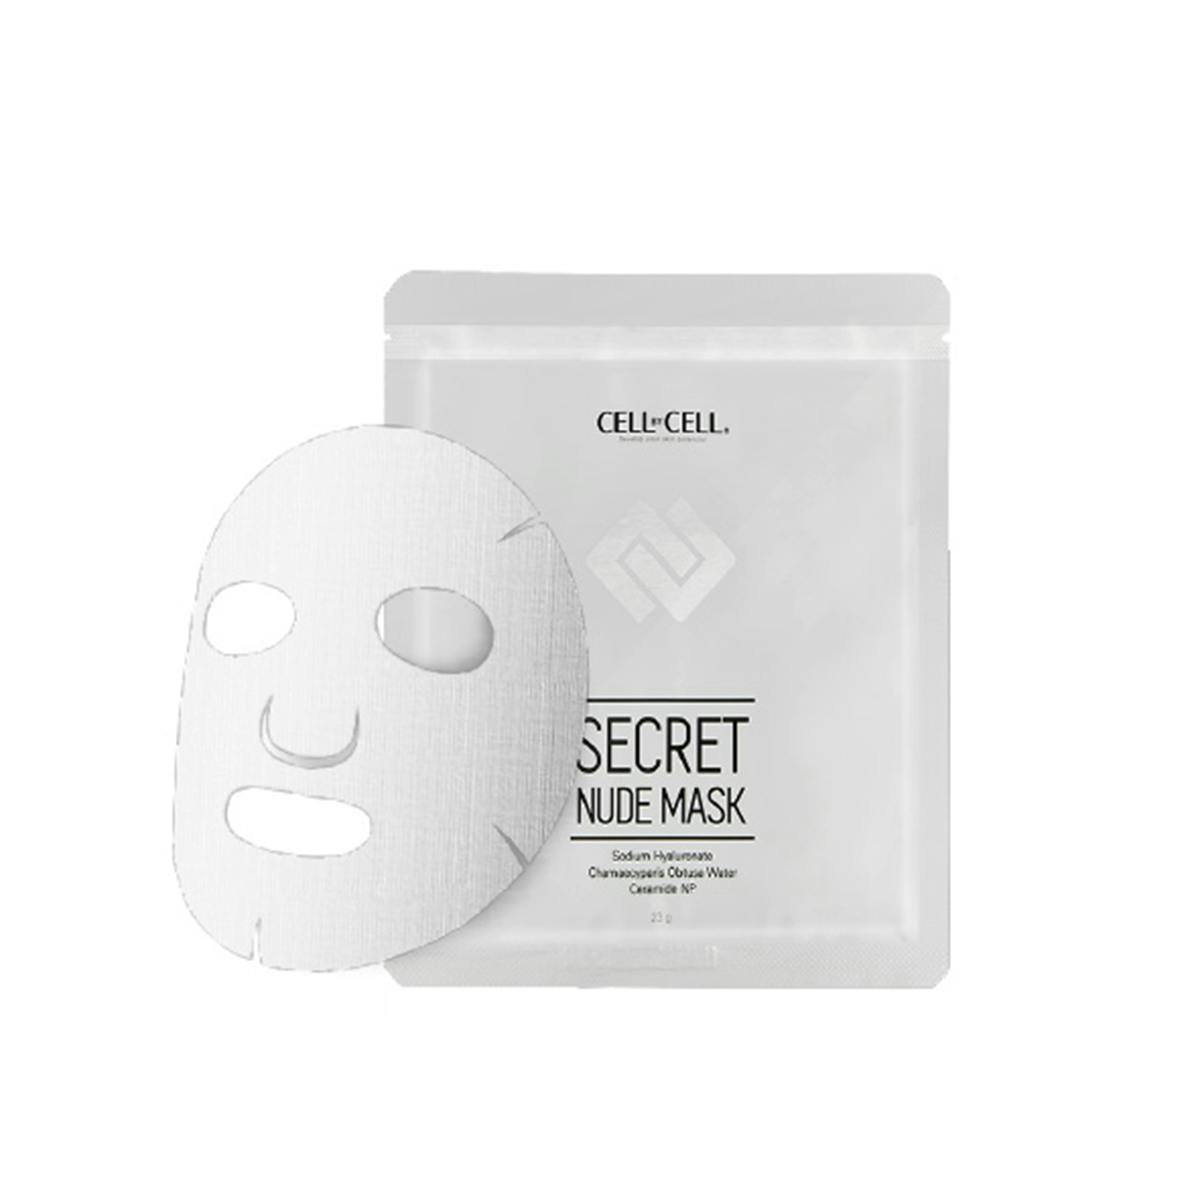 CELL BY CELL - SECRET NUDE MASK / 5 pcs.